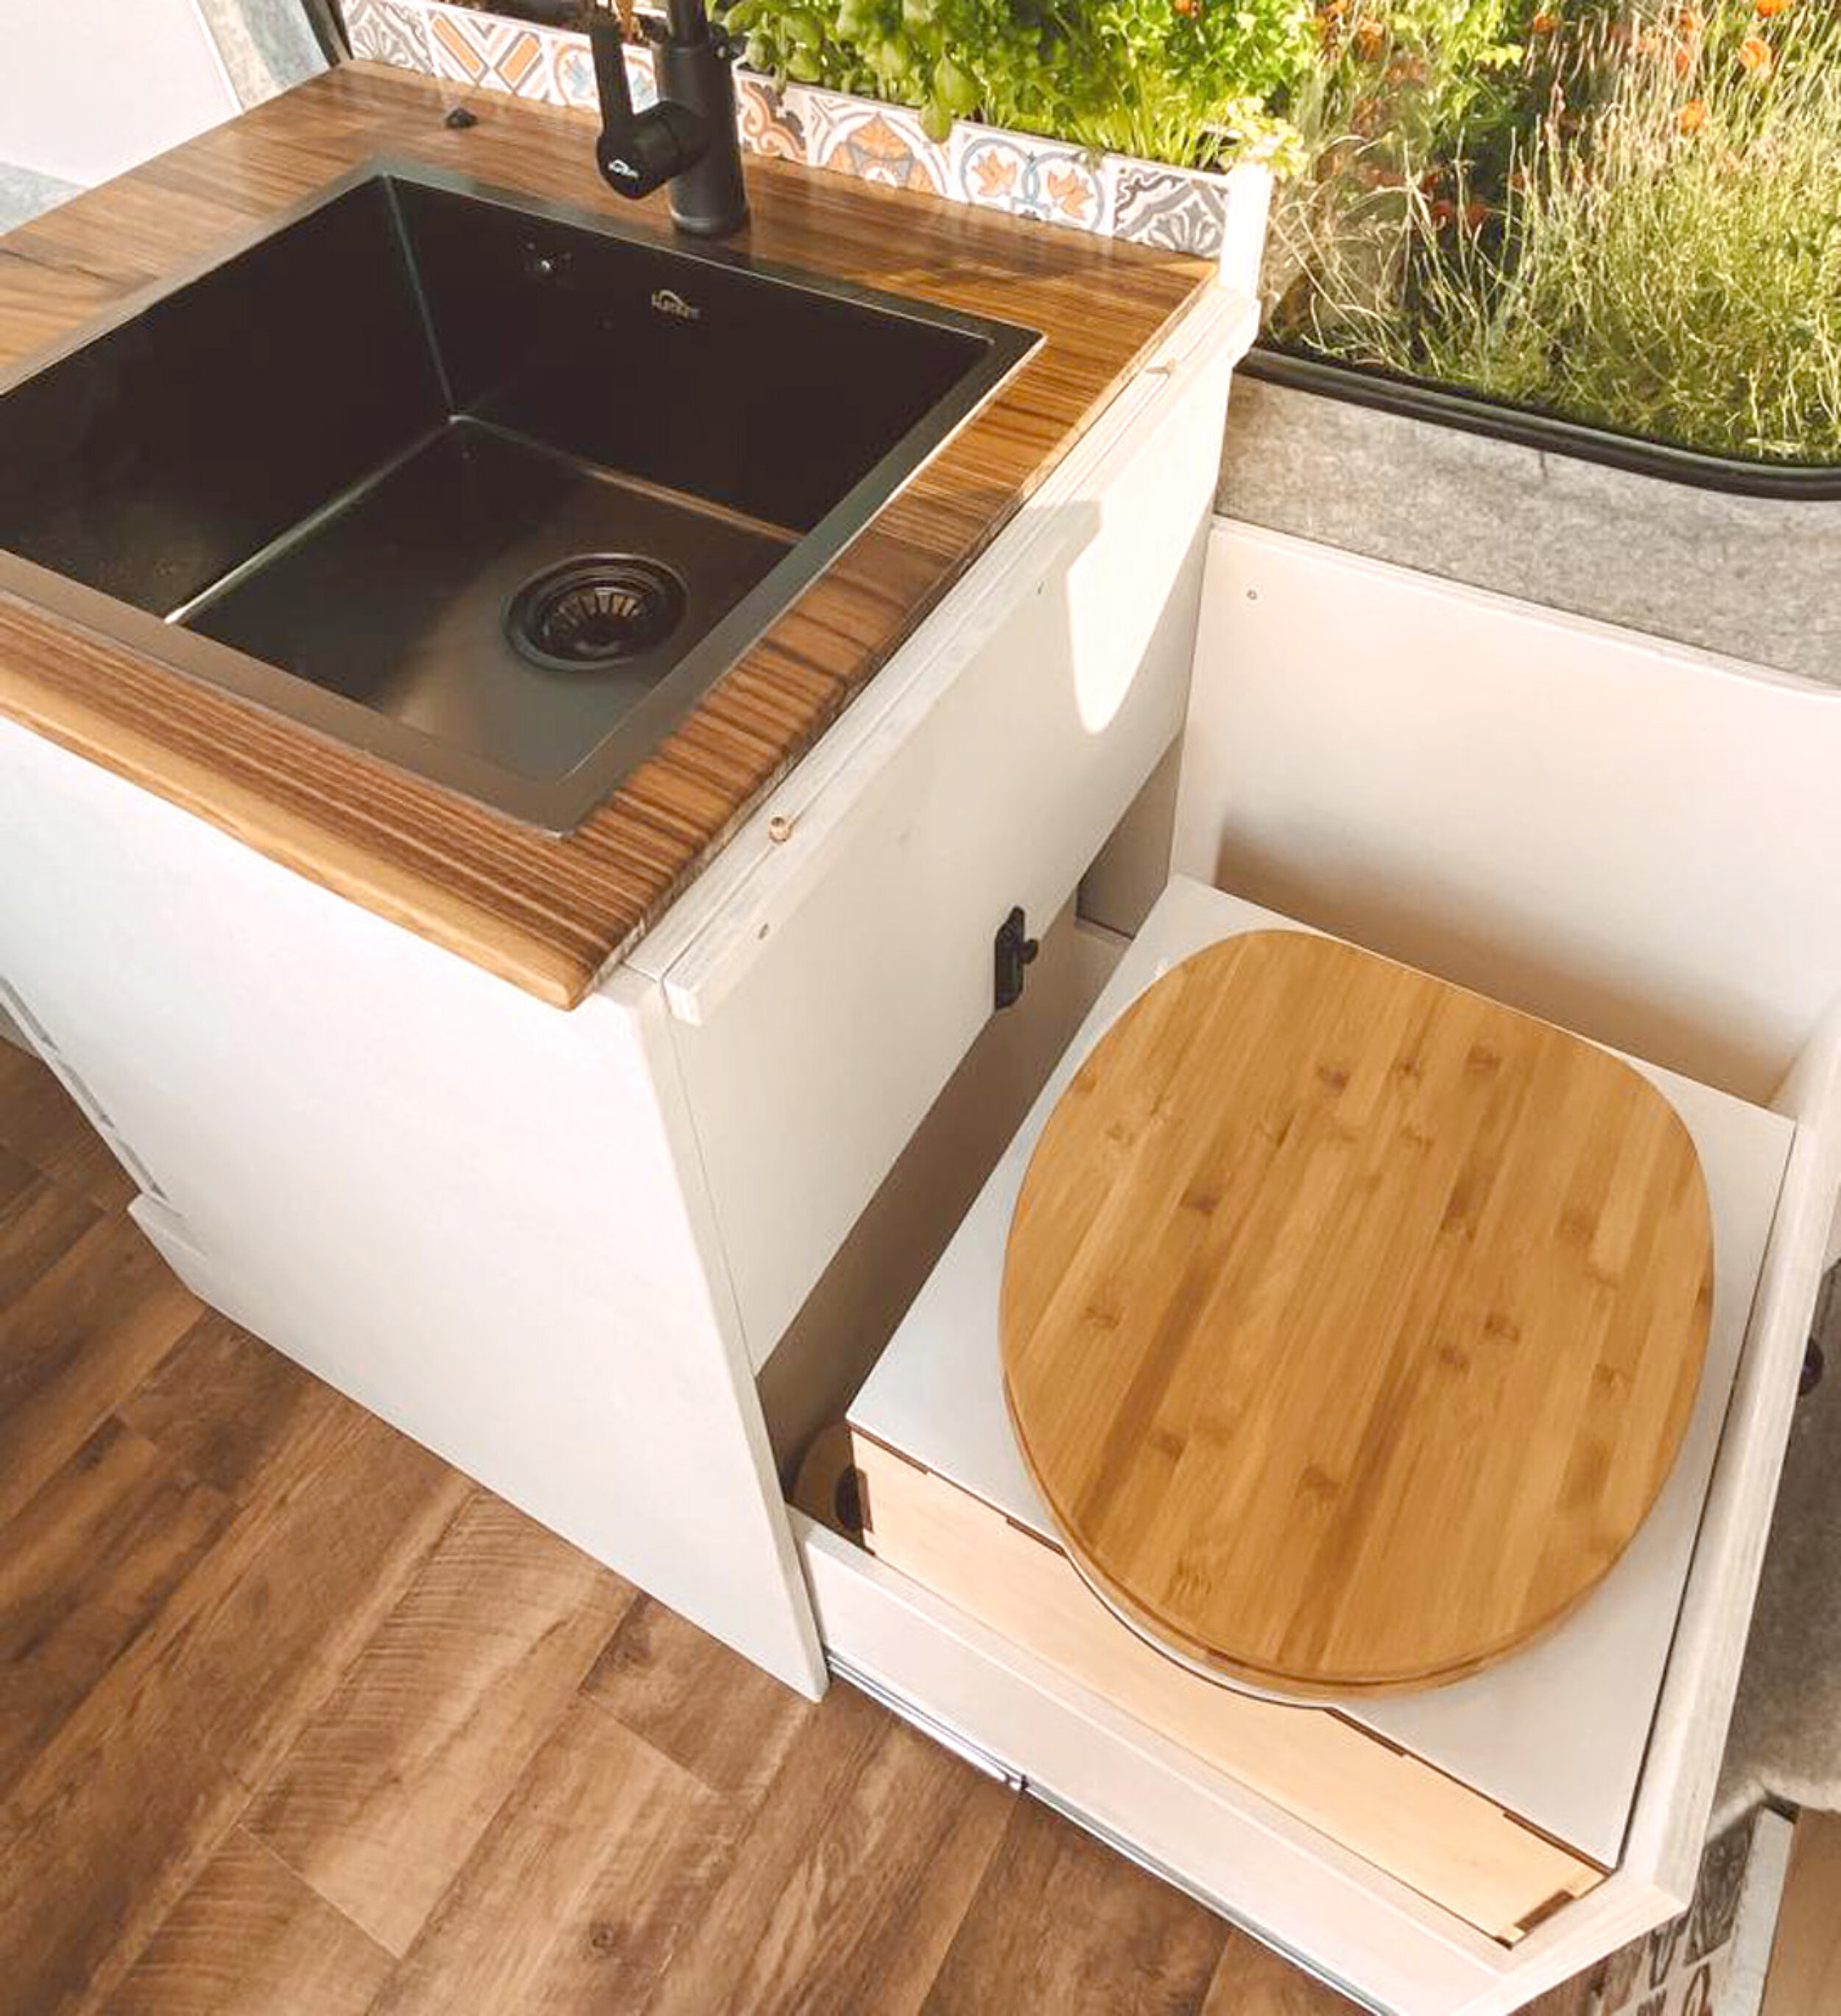 Our bamboo toilet seat on the EasyLoo composting toilet goes particularly well with an interior design with wooden surfaces